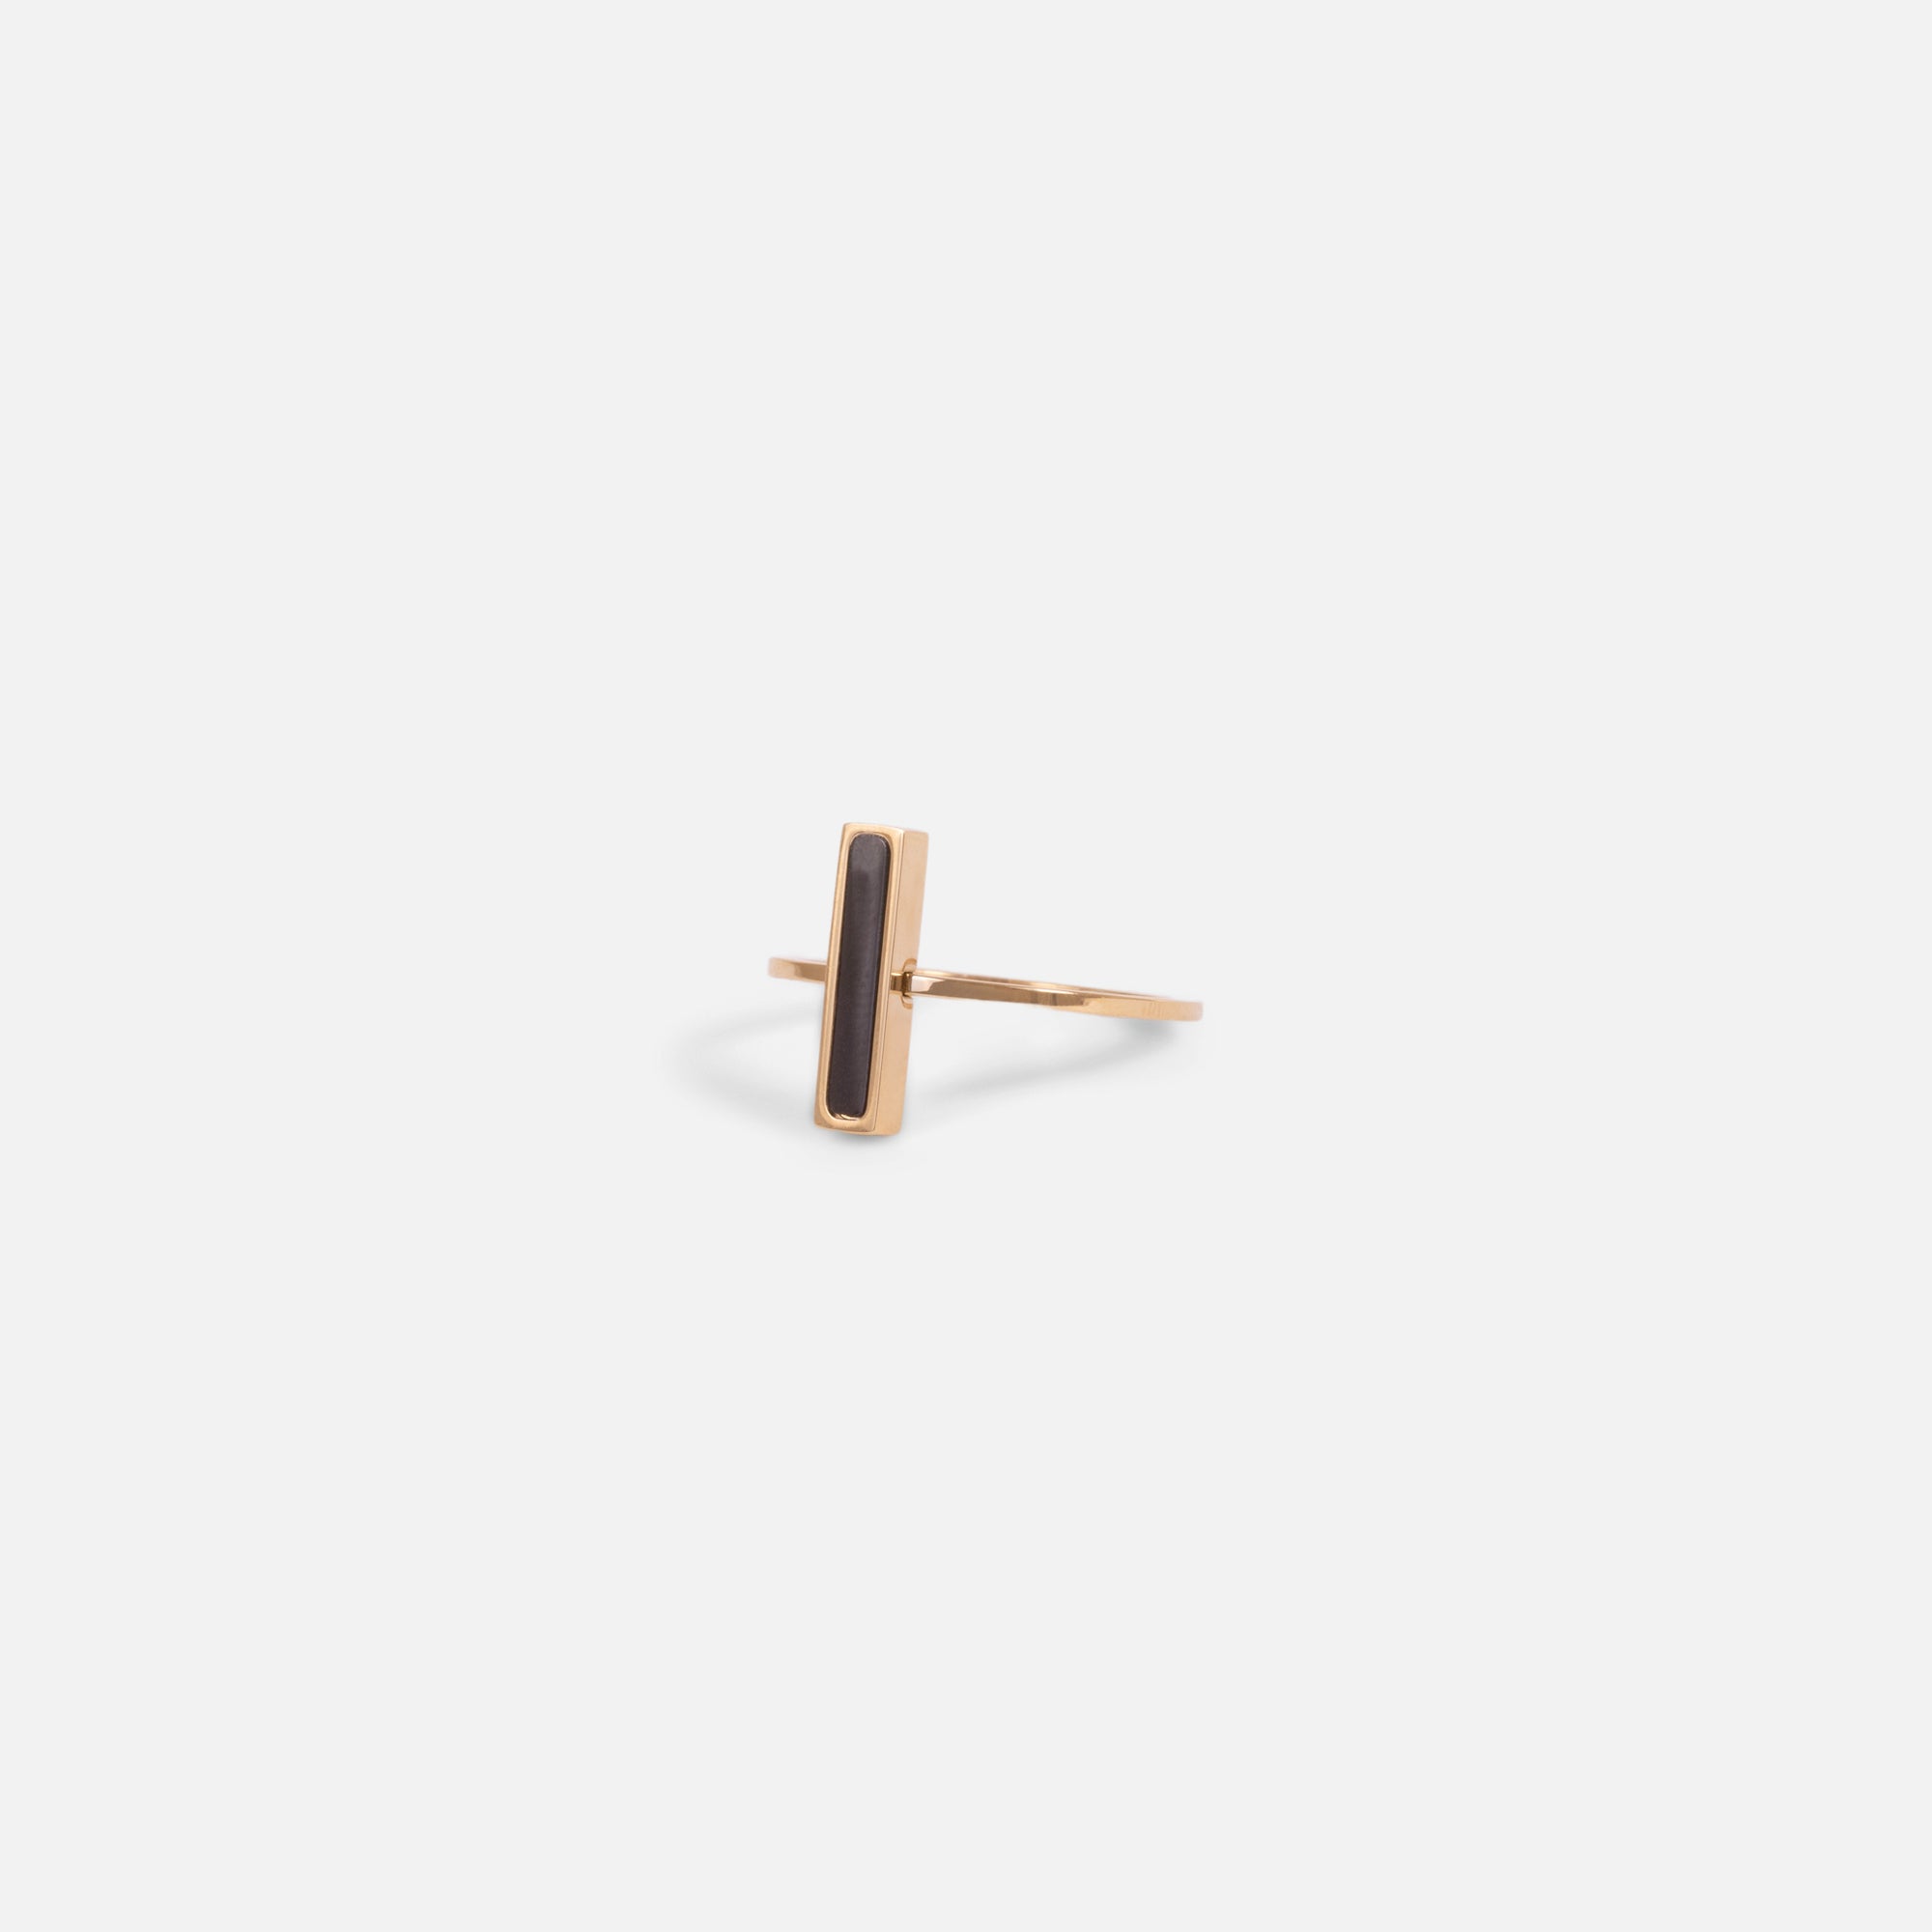 Golden stainless steel ring with rectangle